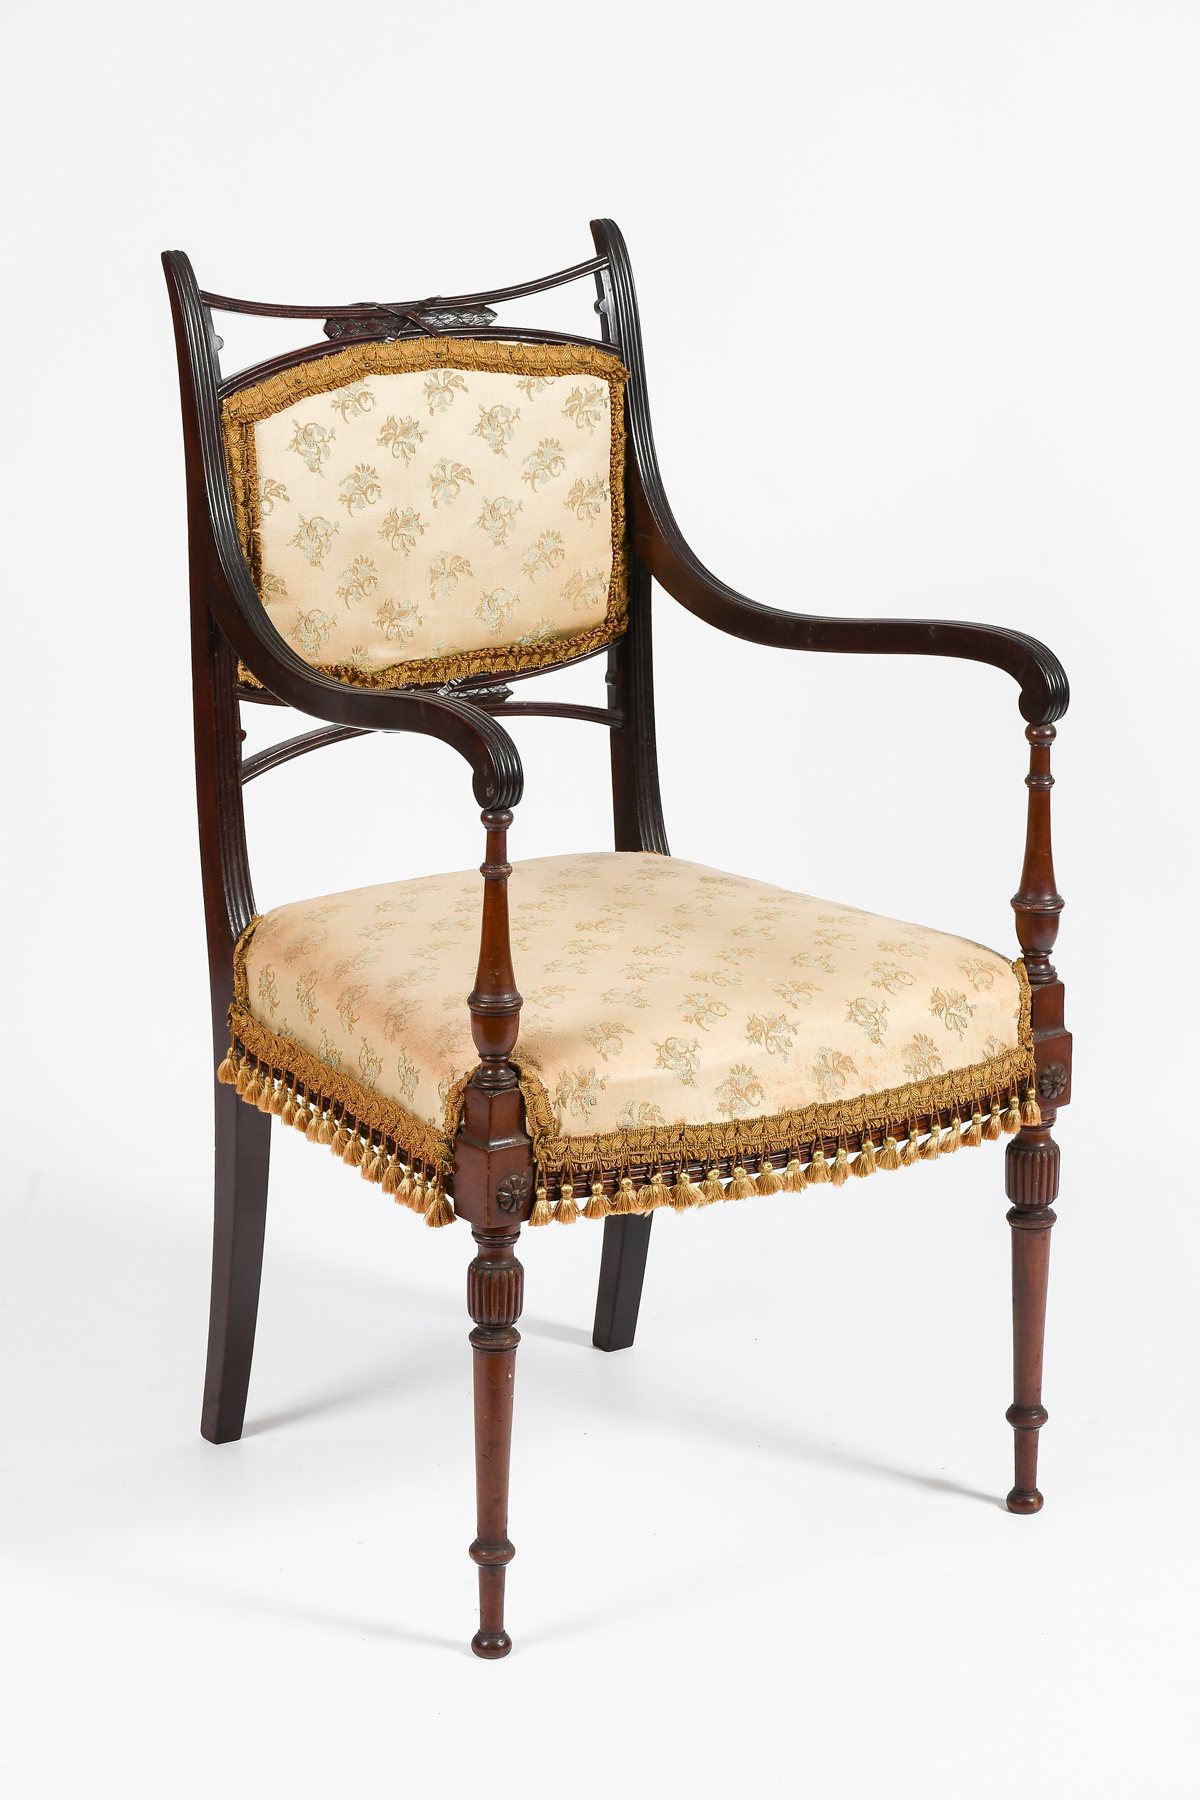 JOHN BUTCHER FRENCH CARVED ARMCHAIR: